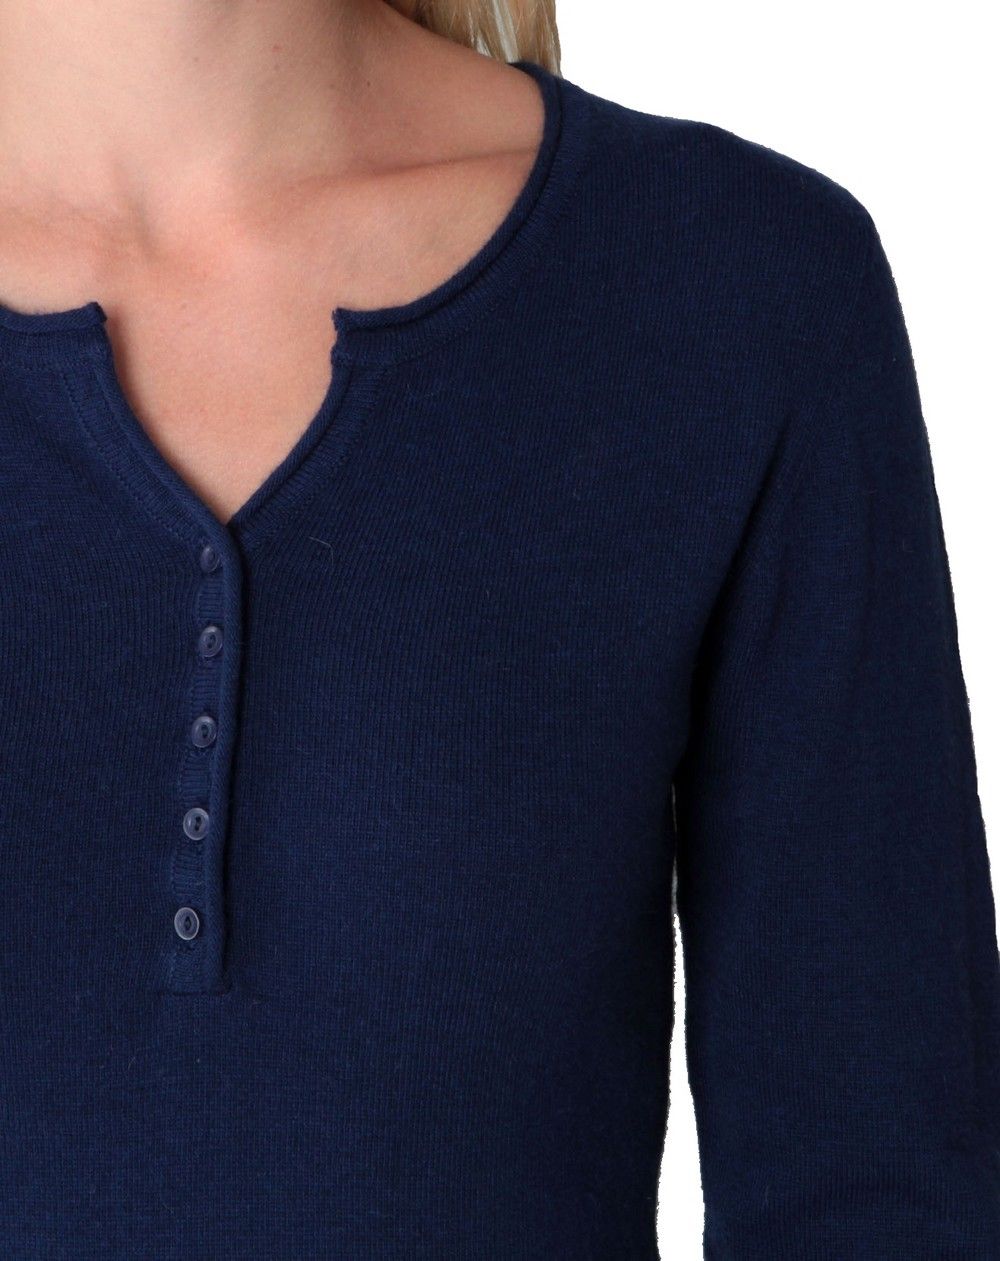 Assuili Tunisian Neck Sweater with Rolled Buttons in Navy